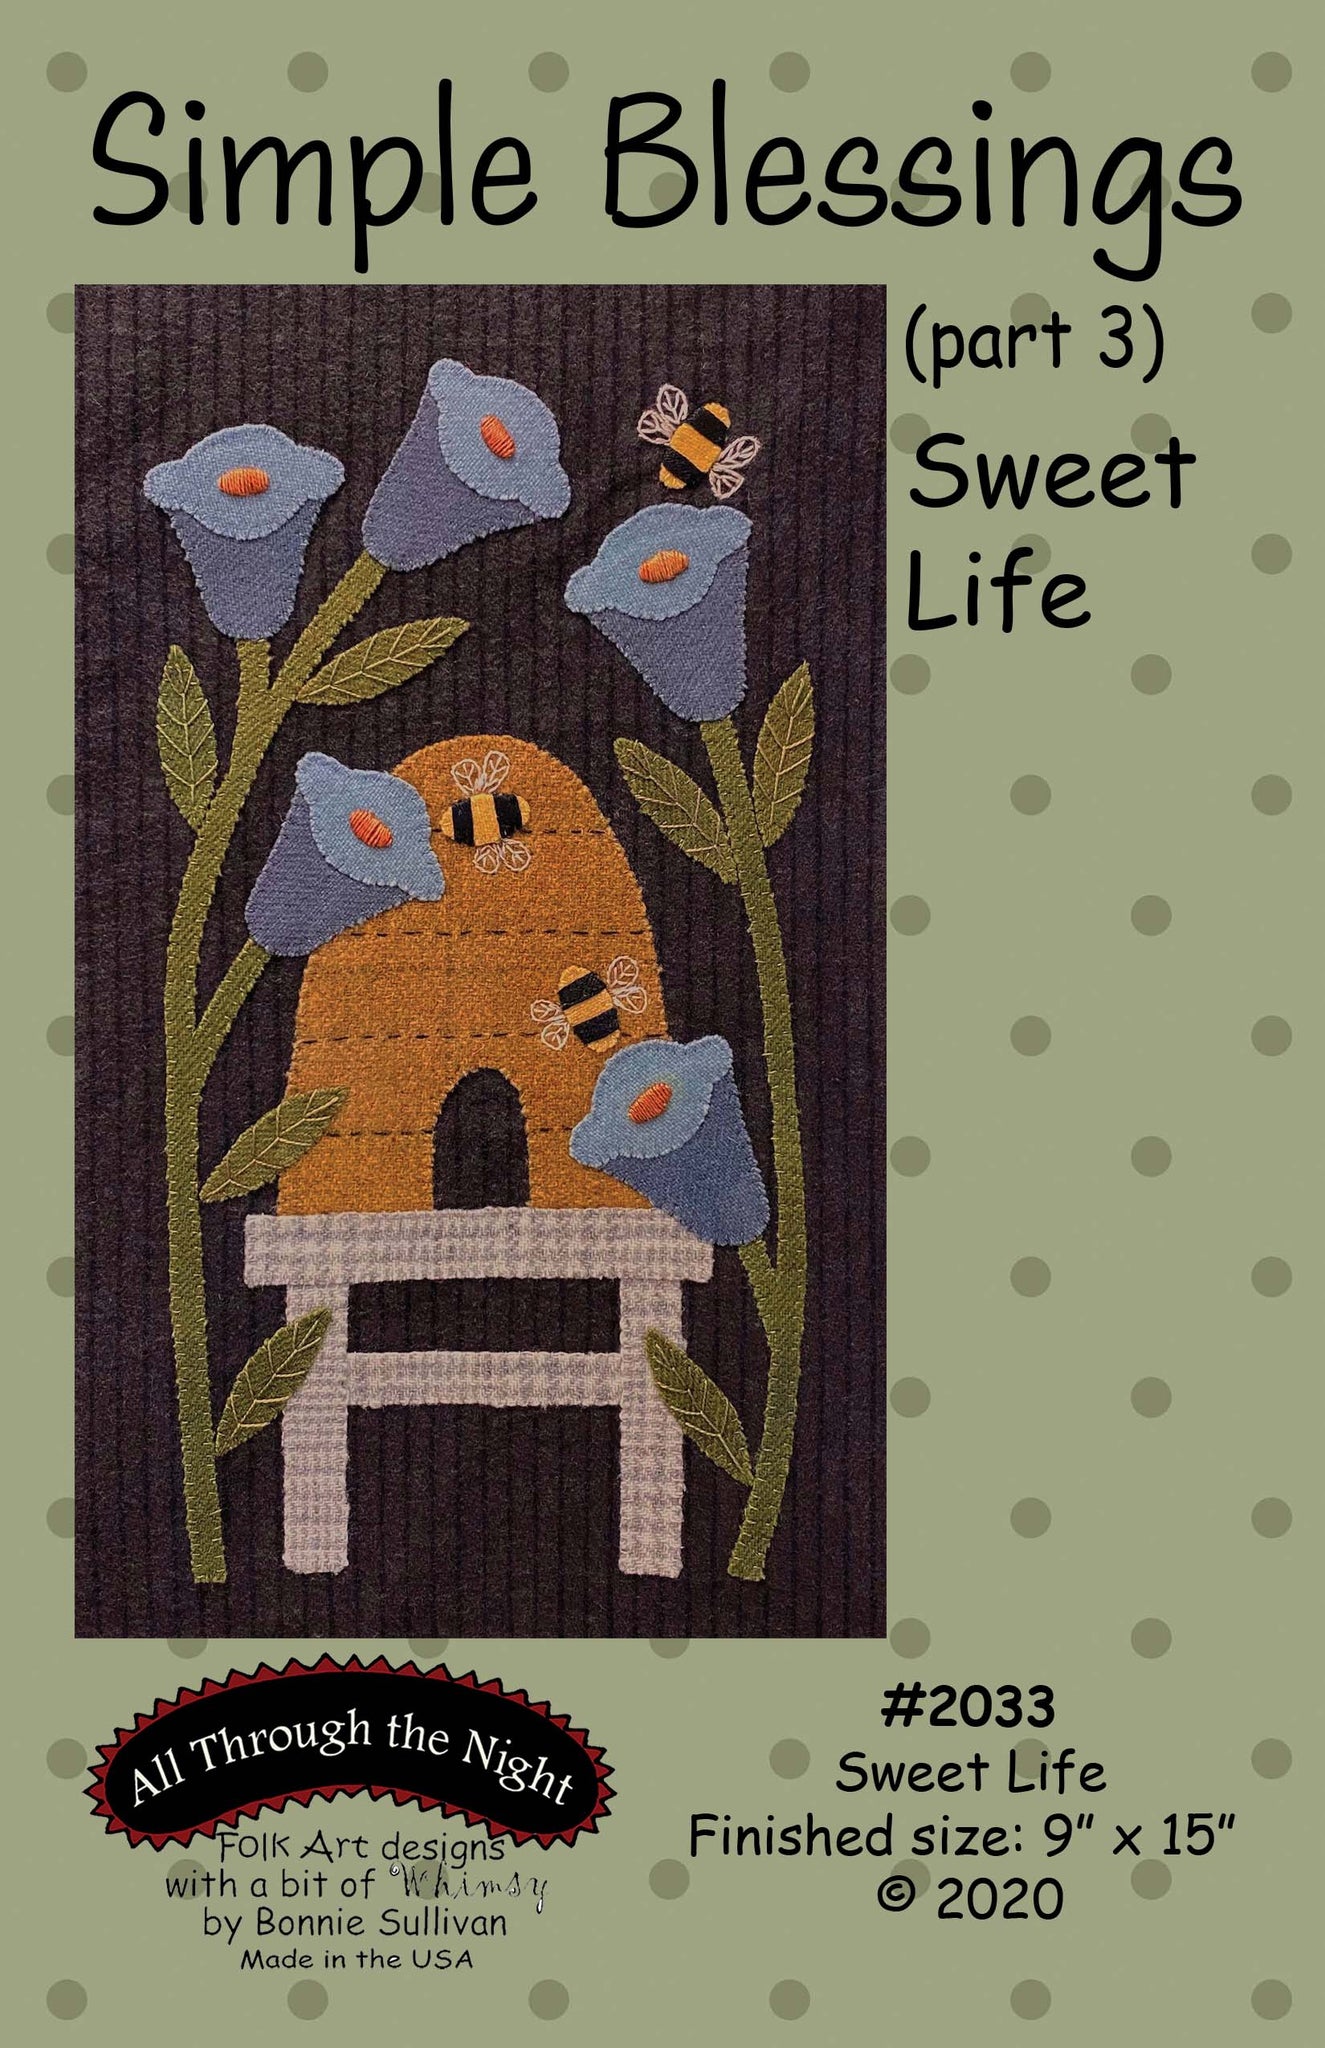 #2033 Simple Blessings " Sweet Life" Part #3